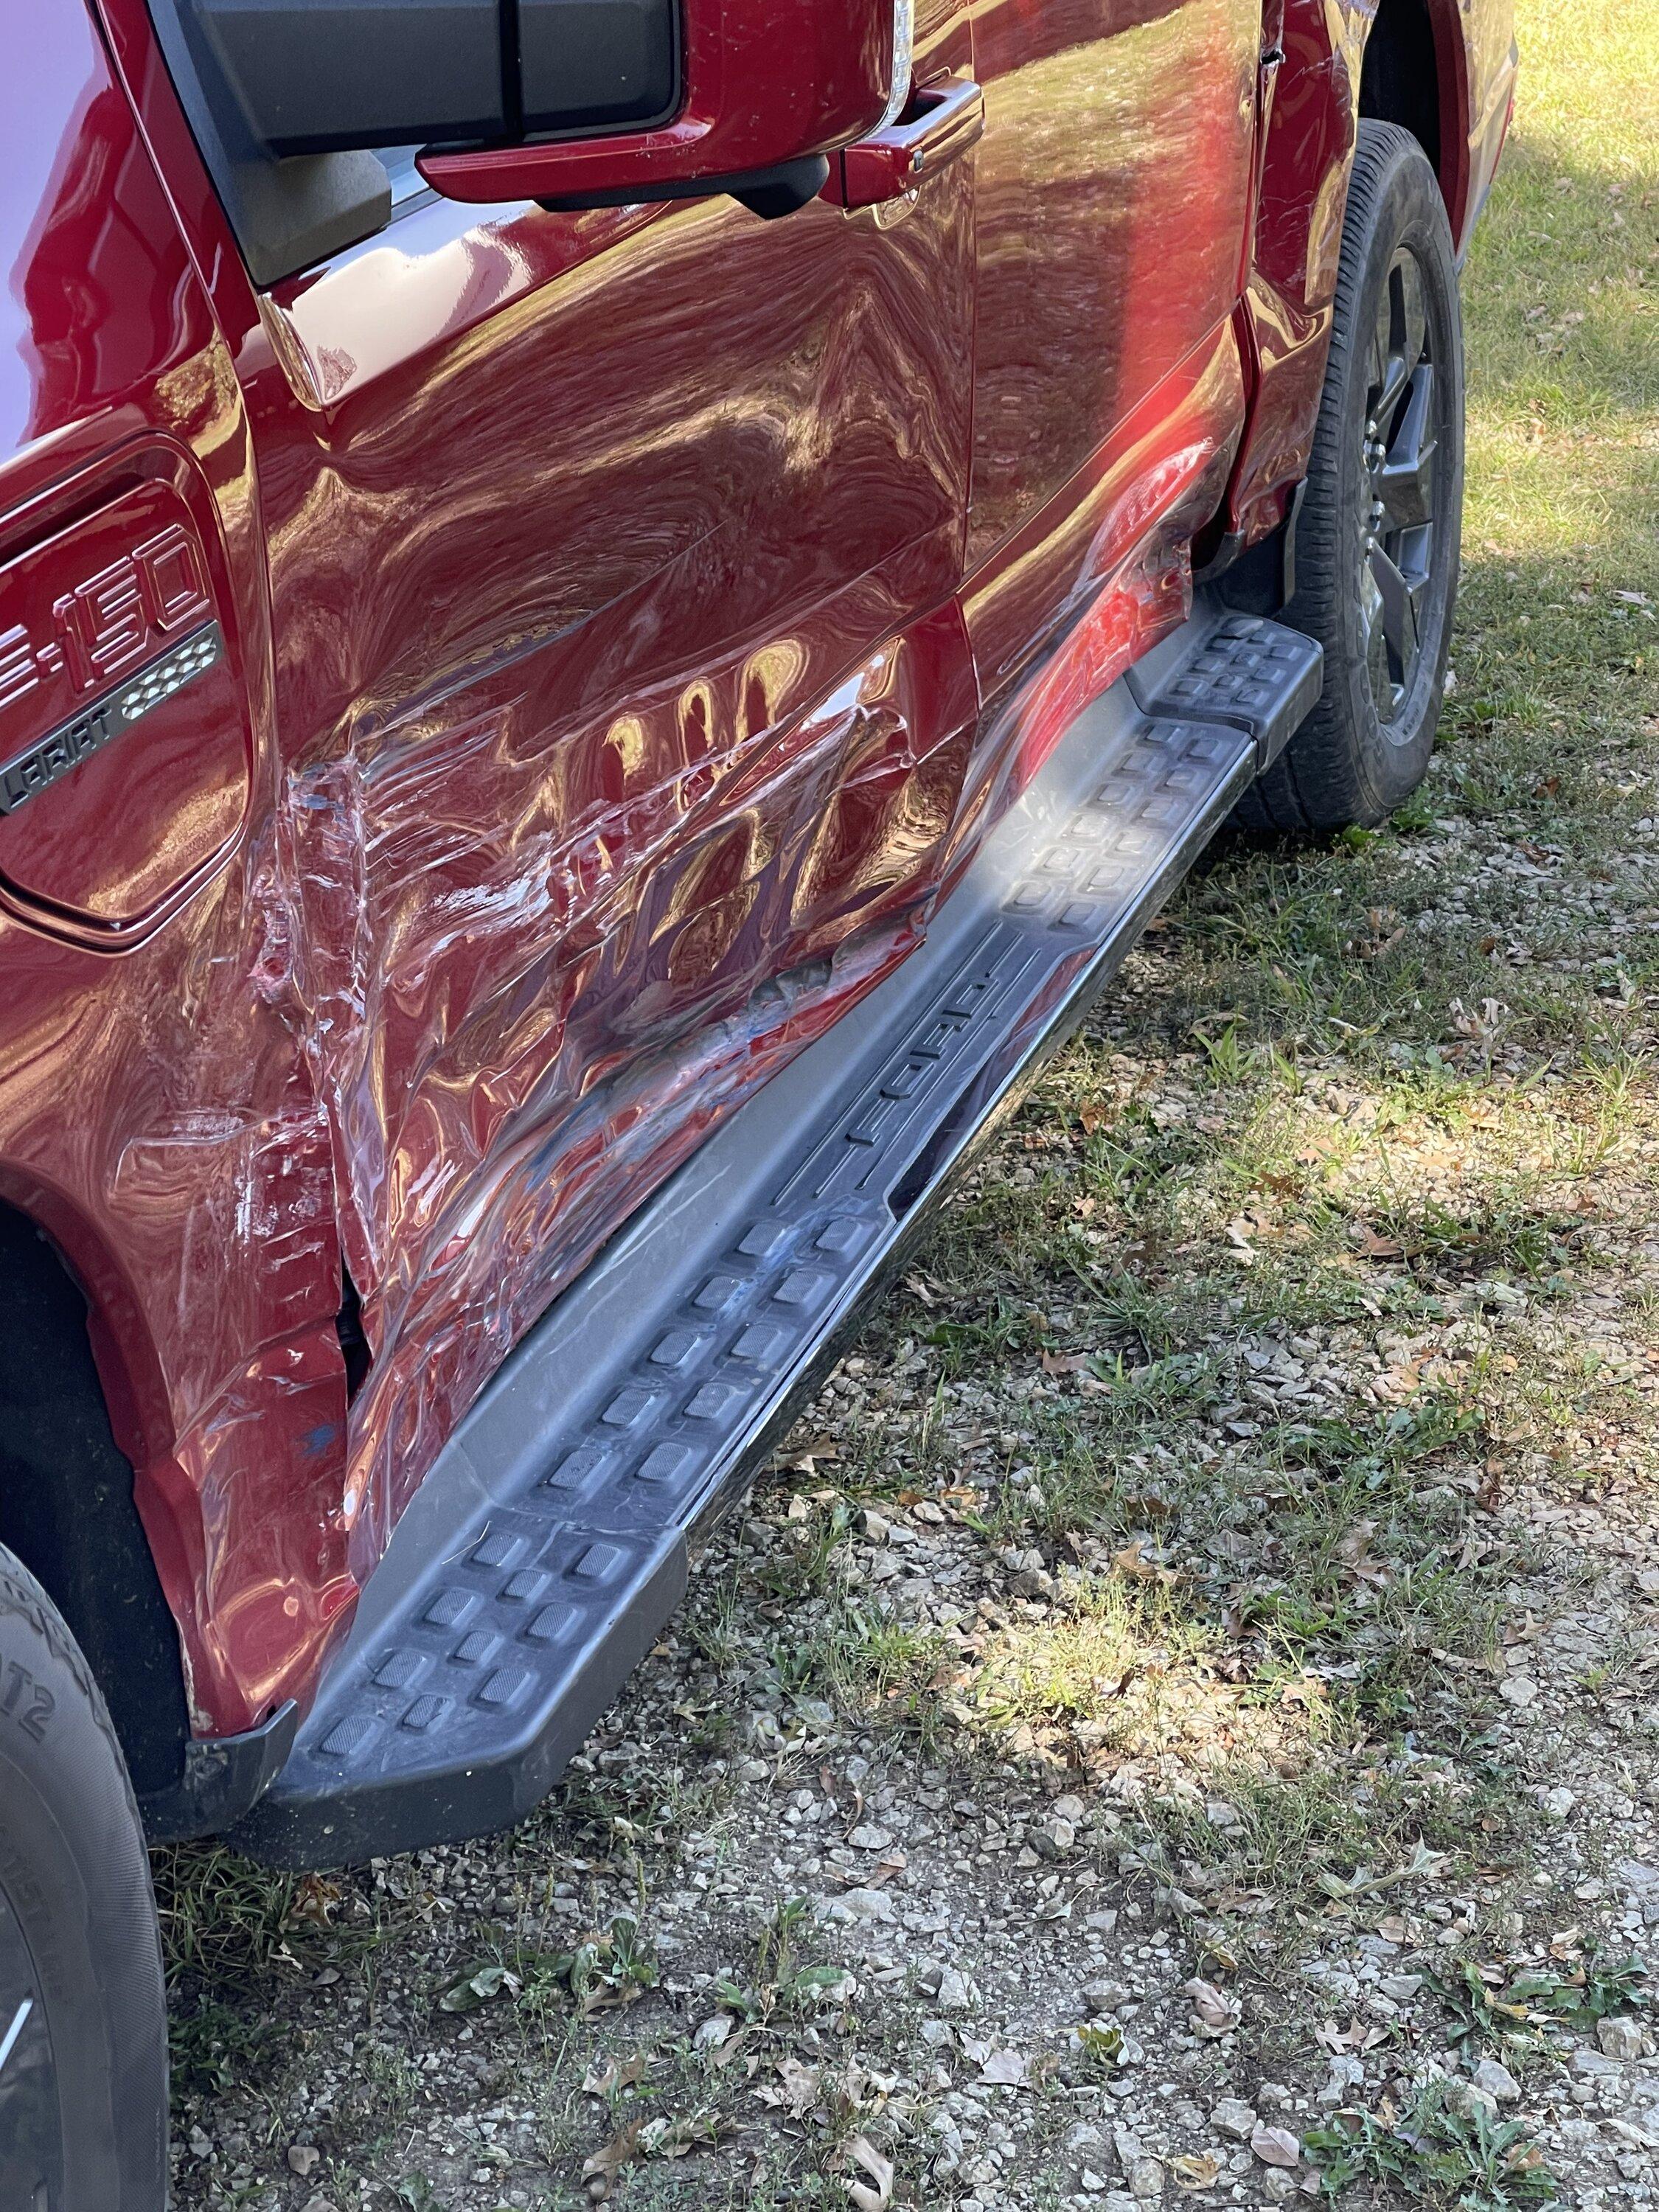 Ford F-150 Lightning Major damage to my new Lightning (T-bone collision)  - now what? 783CAF9A-CFBF-44D1-8E58-C03970586A08